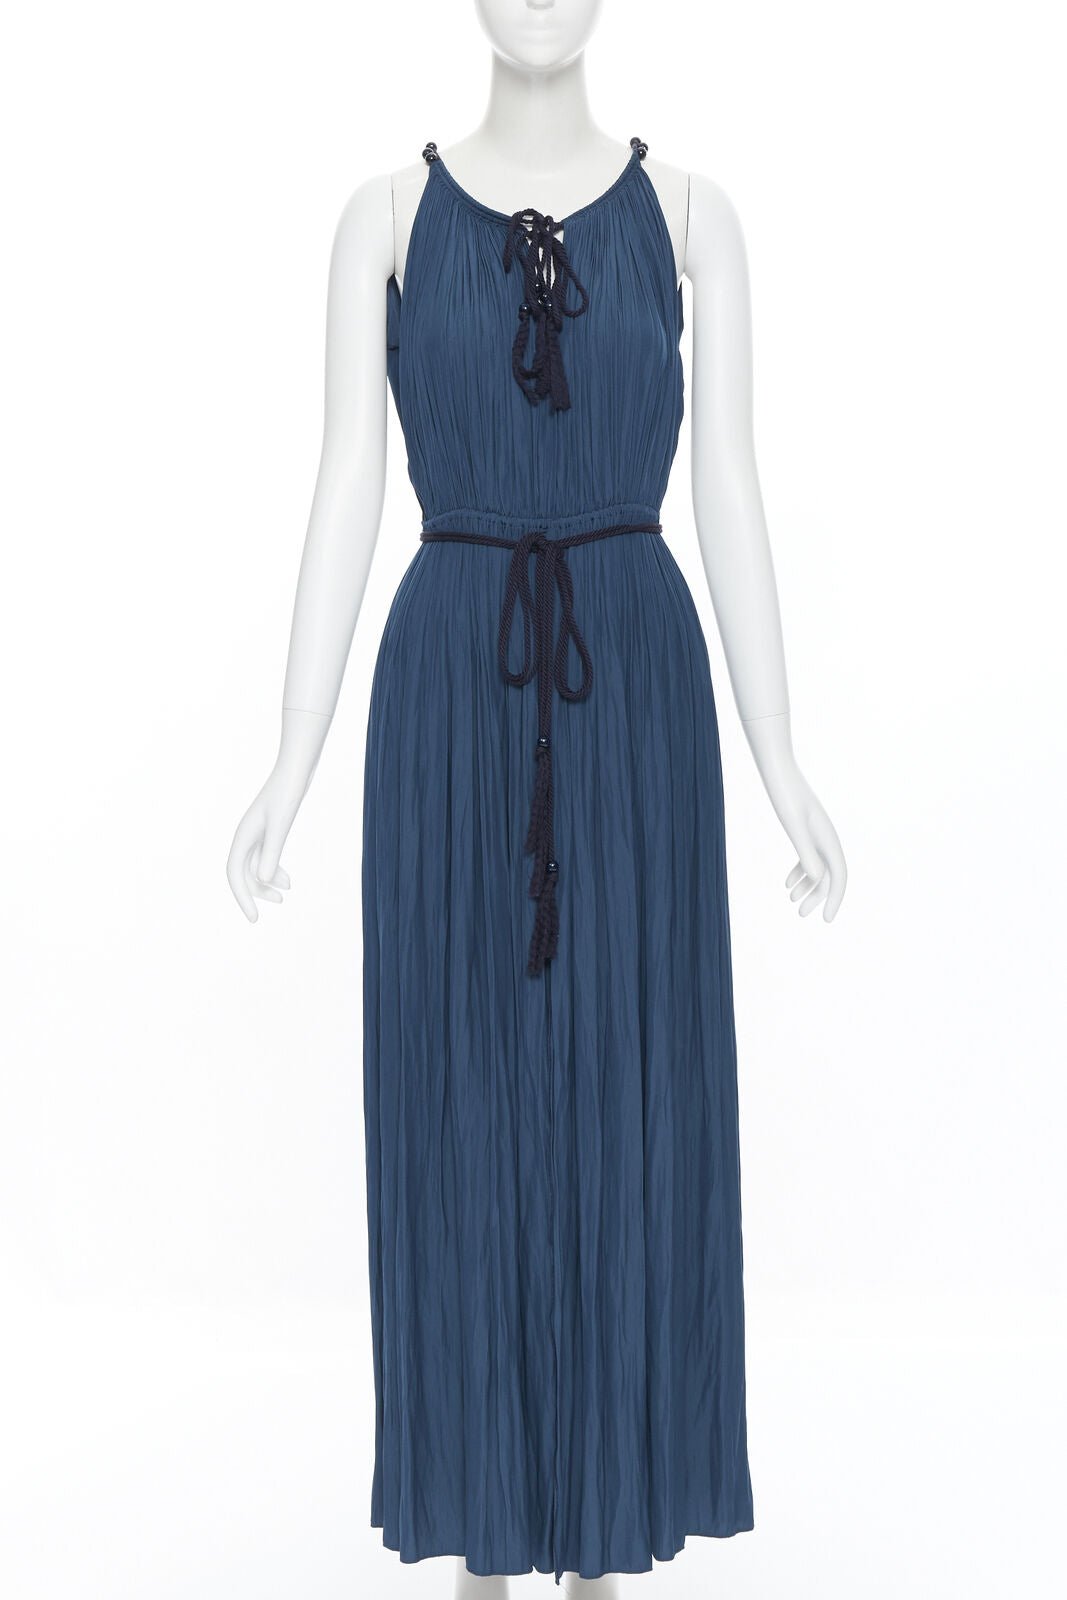 LANVIN 2016 teal blue pleated polyester beaded tie string slit maxi dress FR34